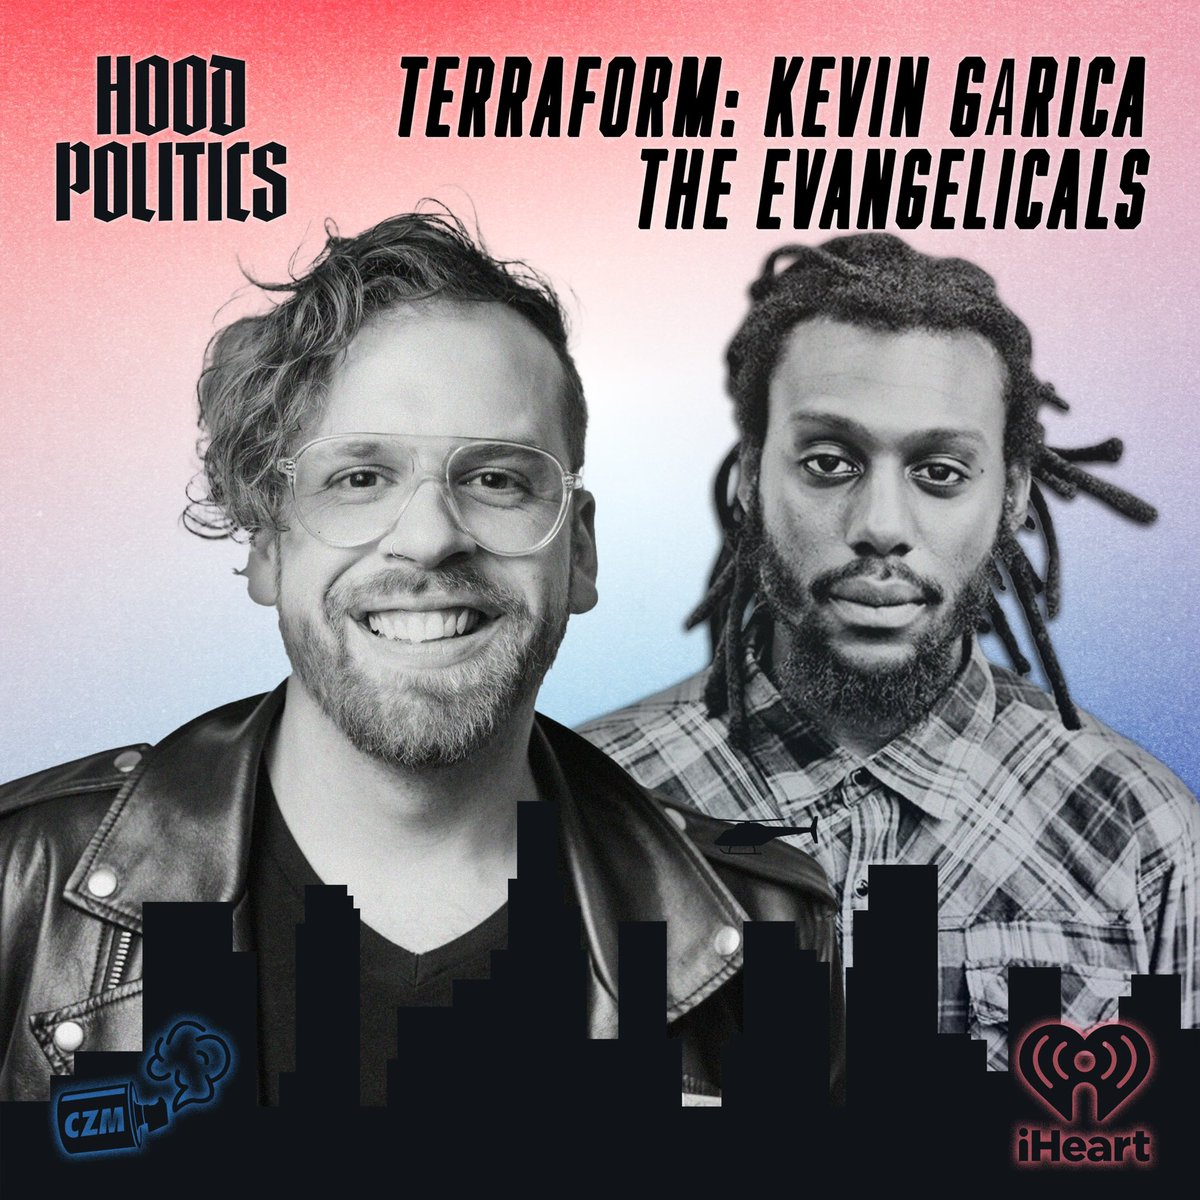 New @hoodpoliticspod w/ @prophiphop This second installment of Terraformers. @theKevinGarcia_, a former Evangelical Worship leader, now is out the closet and leading those who still value their spiritual practice but just cant stomach evangelicalism. iheart.com/podcast/1119-h…